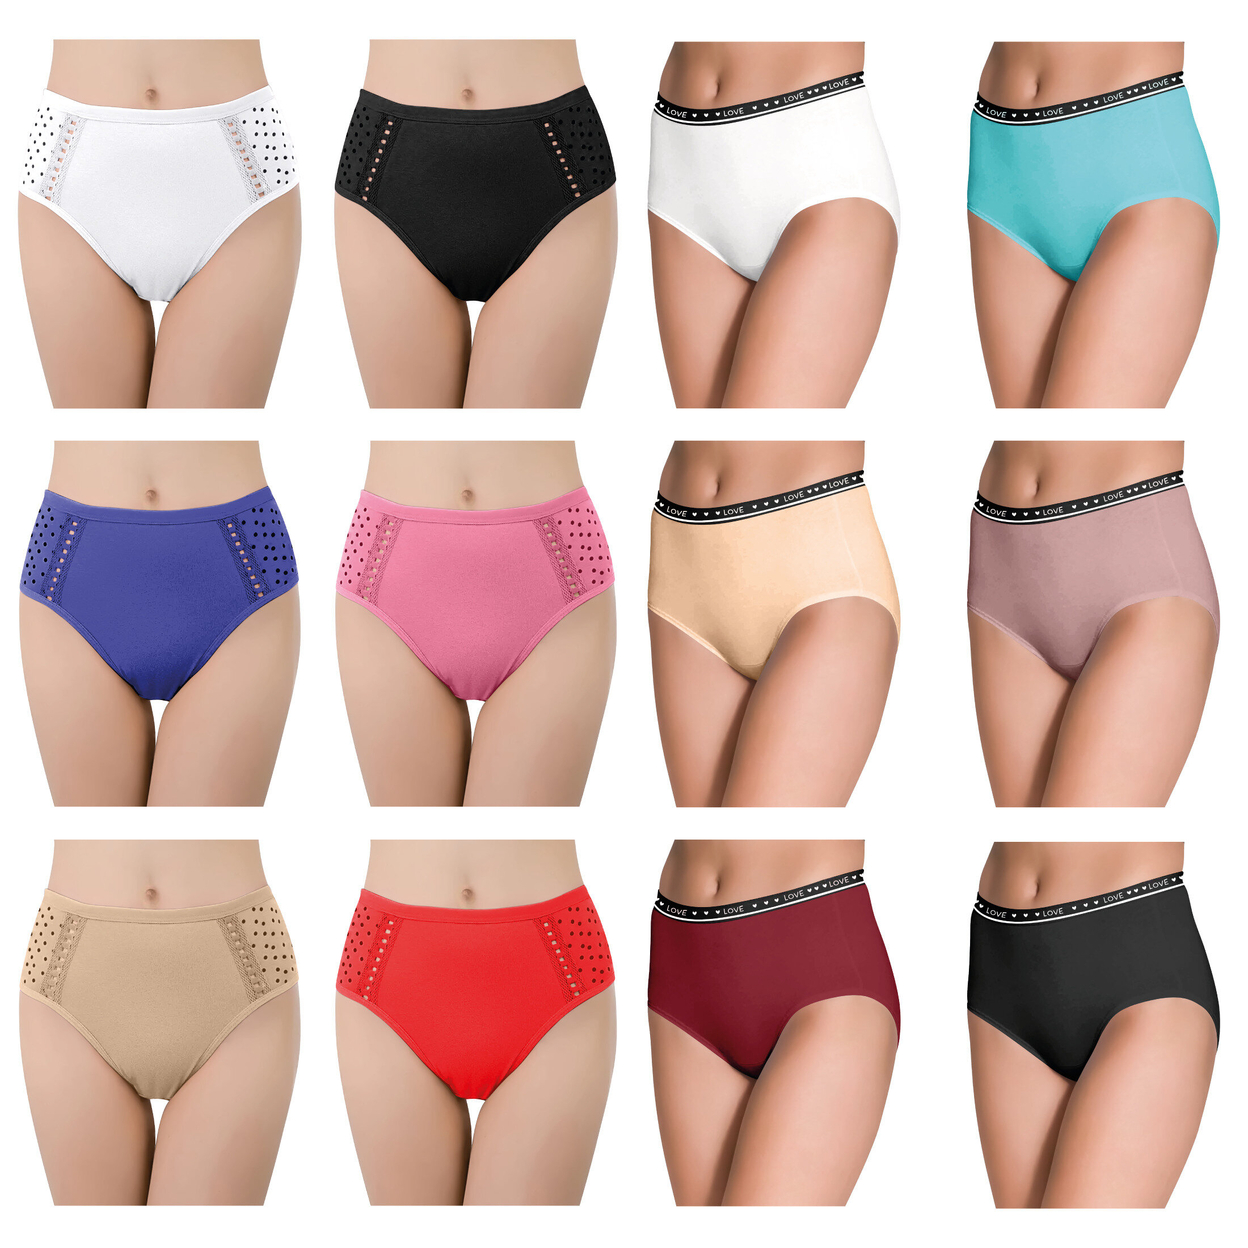 6-Pack: Women's Ultra Soft Moisture Wicking Panties Cotton Perfect Fit Underwear (Plus Sizes Available) - Large